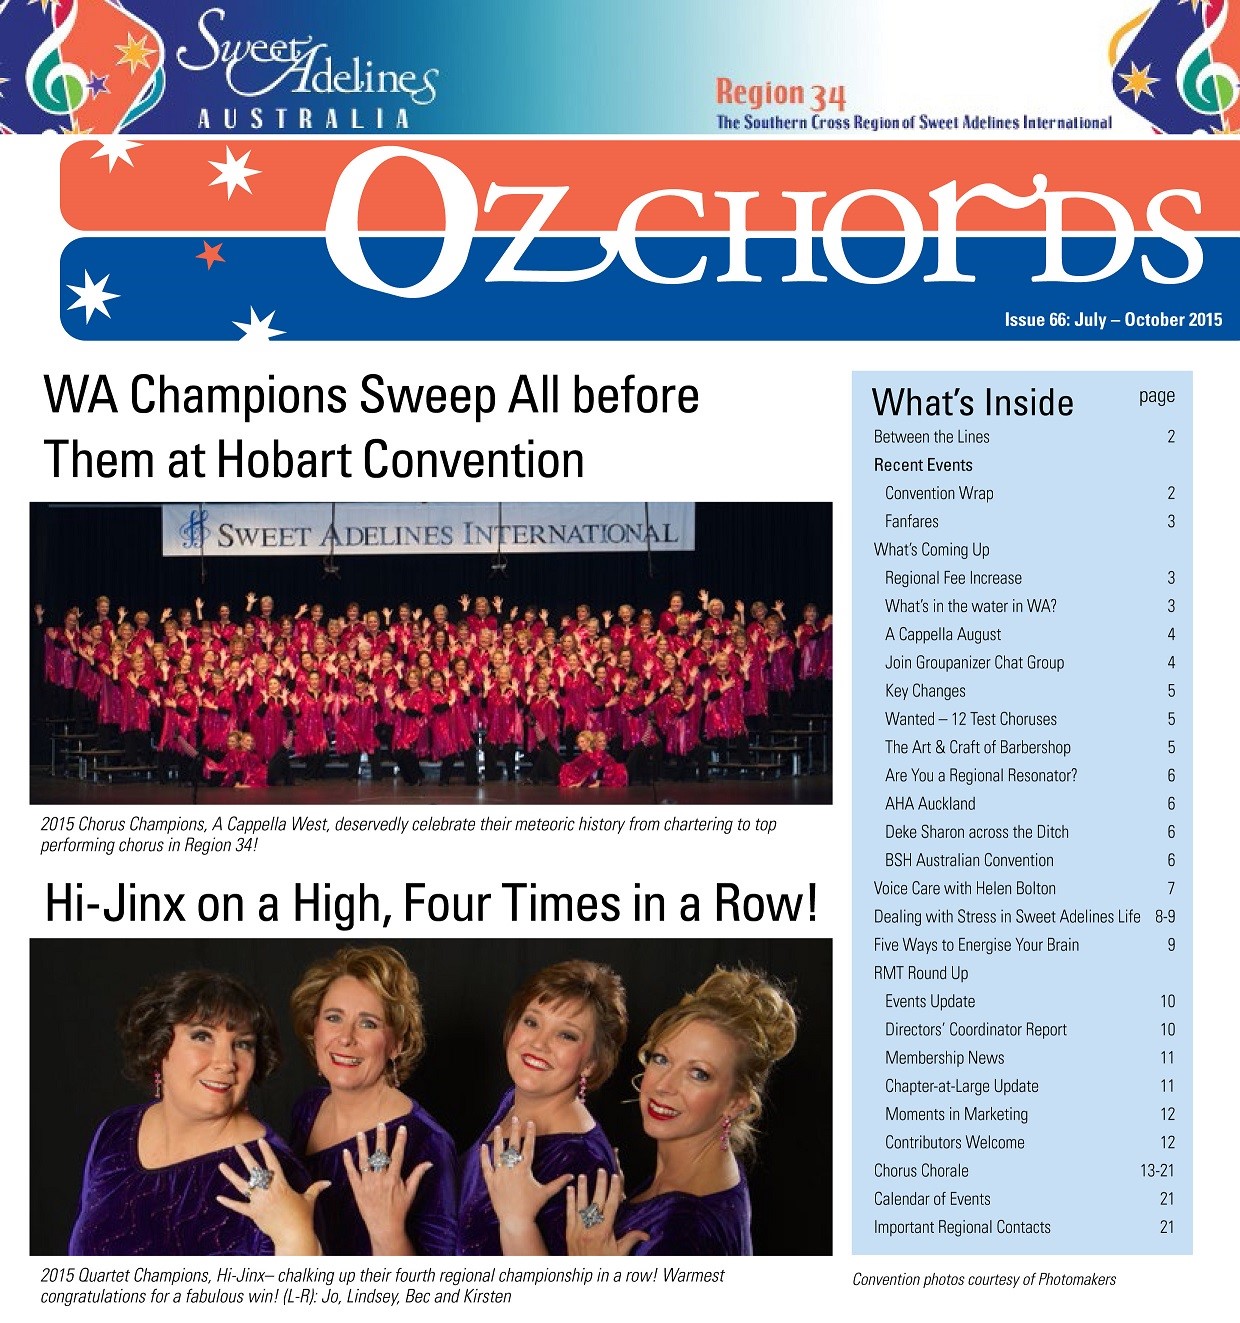 We’re On the Cover of Ozchords